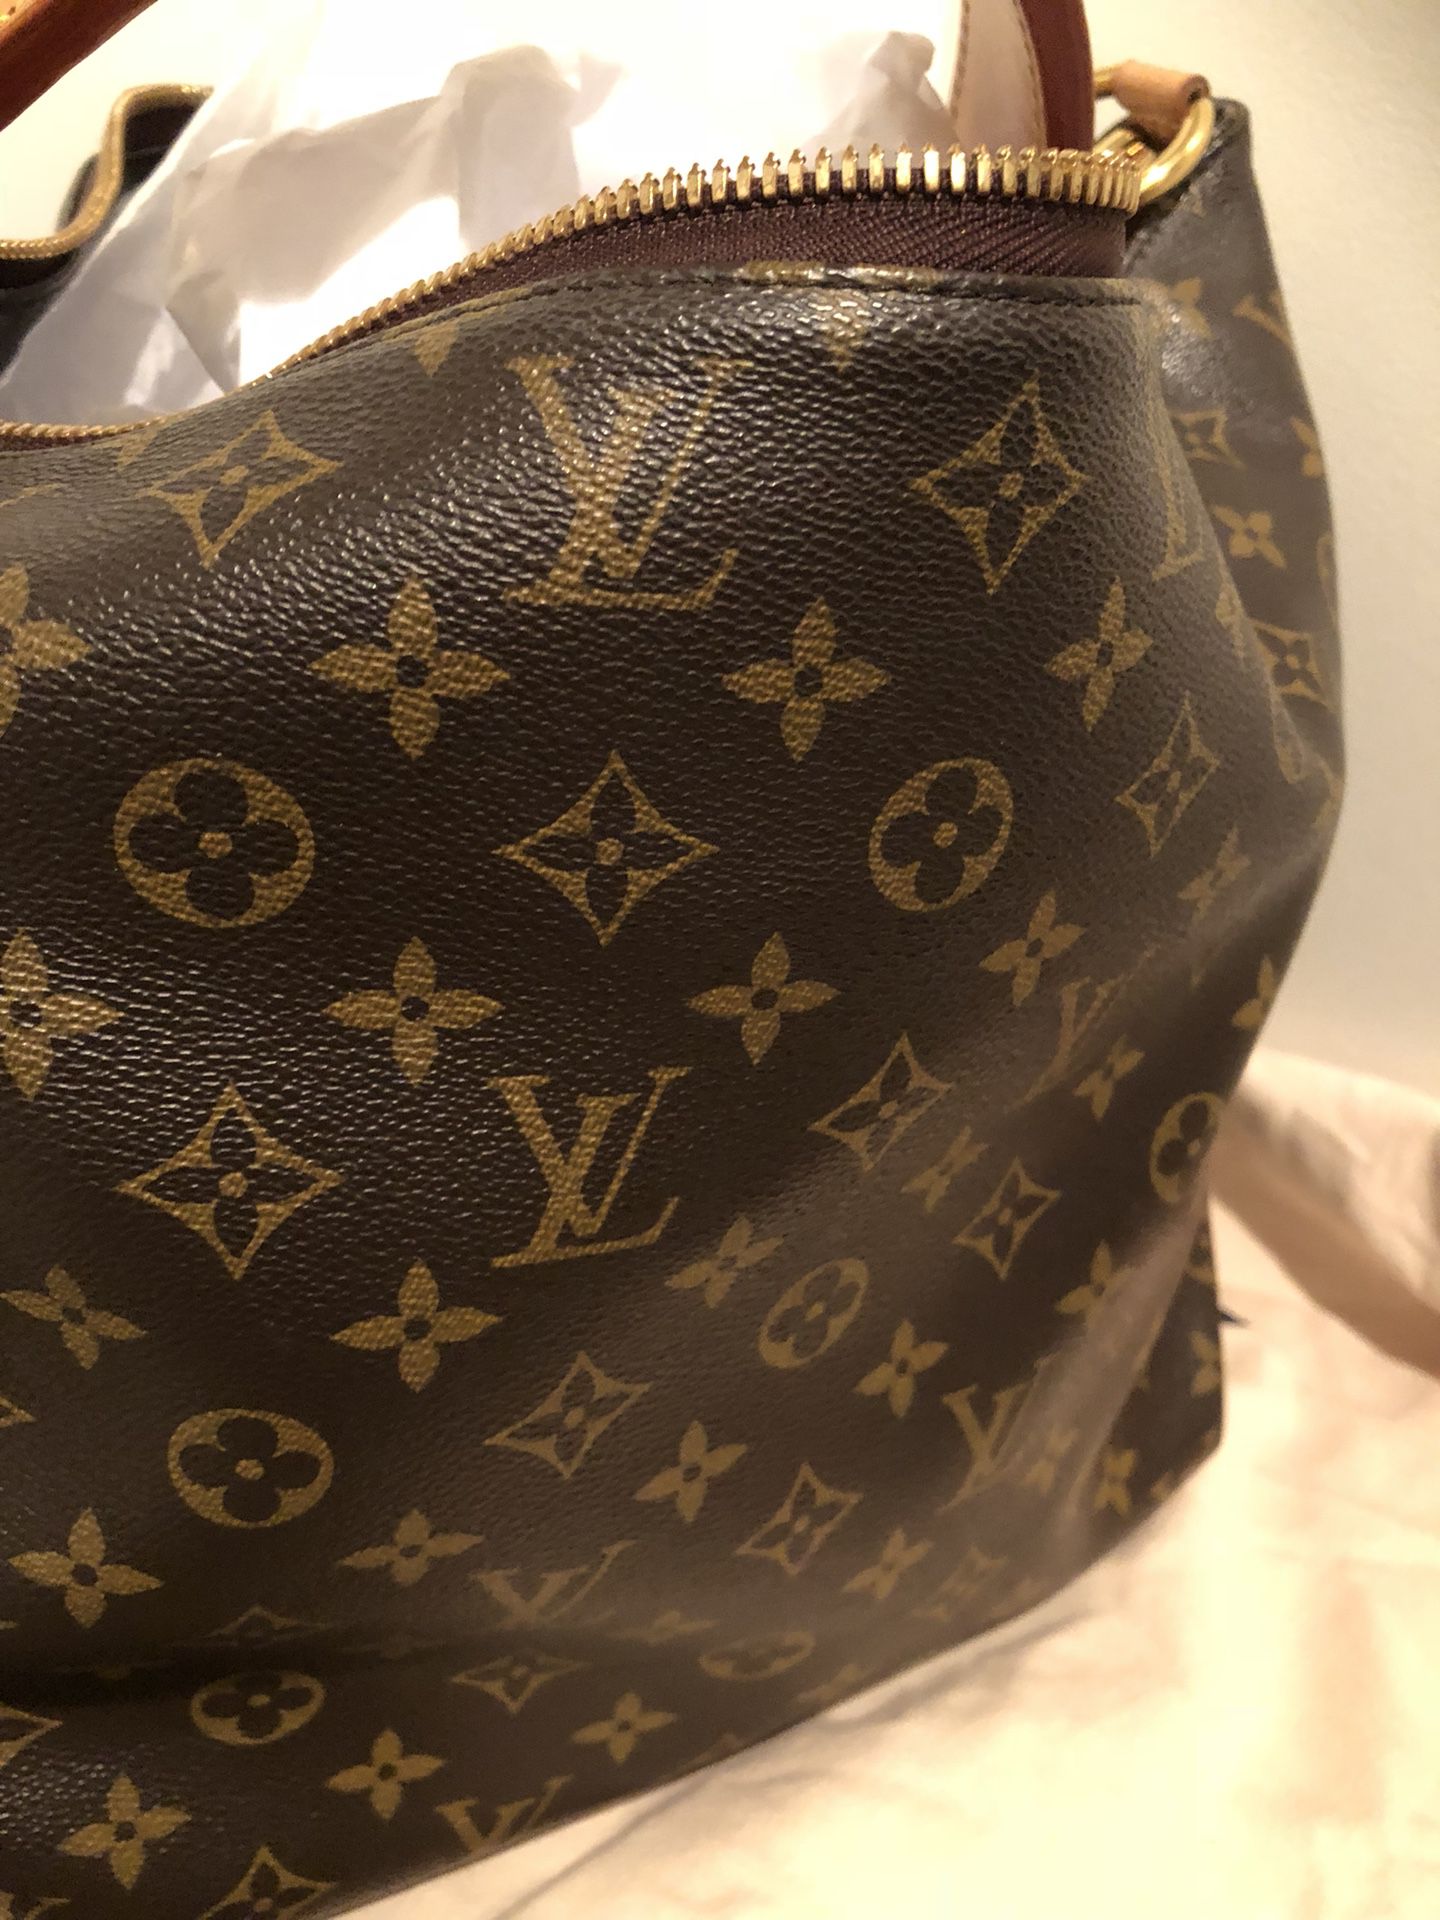 Louis Vuitton Sully MM ( Discontinued) for Sale in Phoenix, AZ - OfferUp